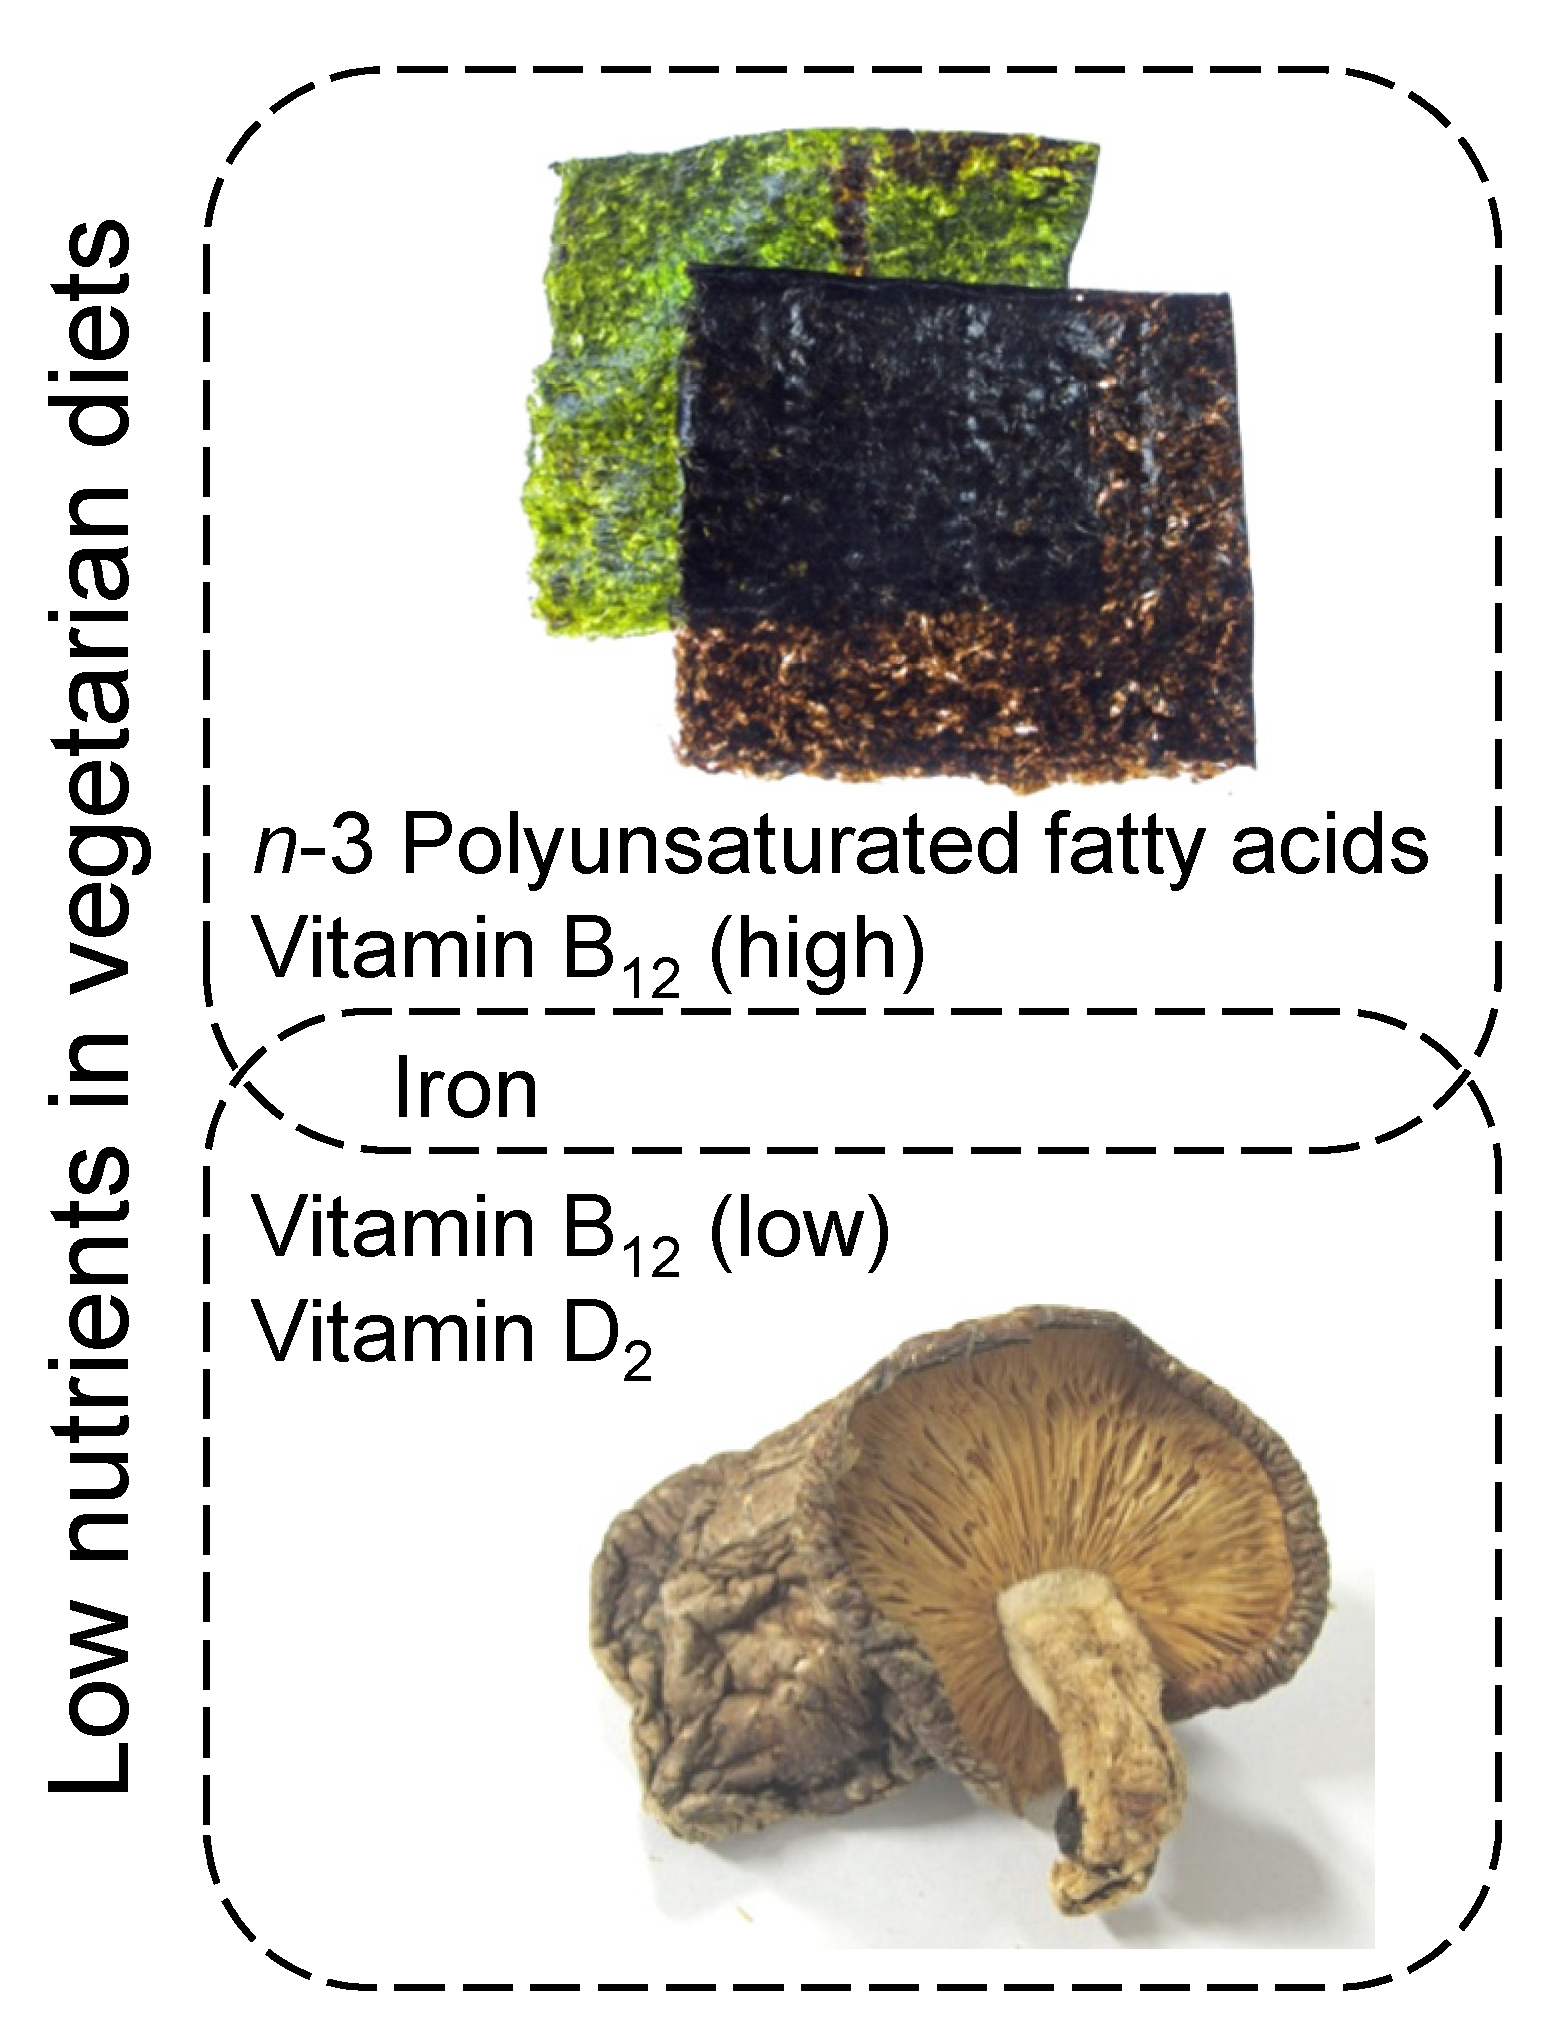 Nutrients | Free Full-Text | Vitamin B12-Containing Plant Food Sources for  Vegetarians